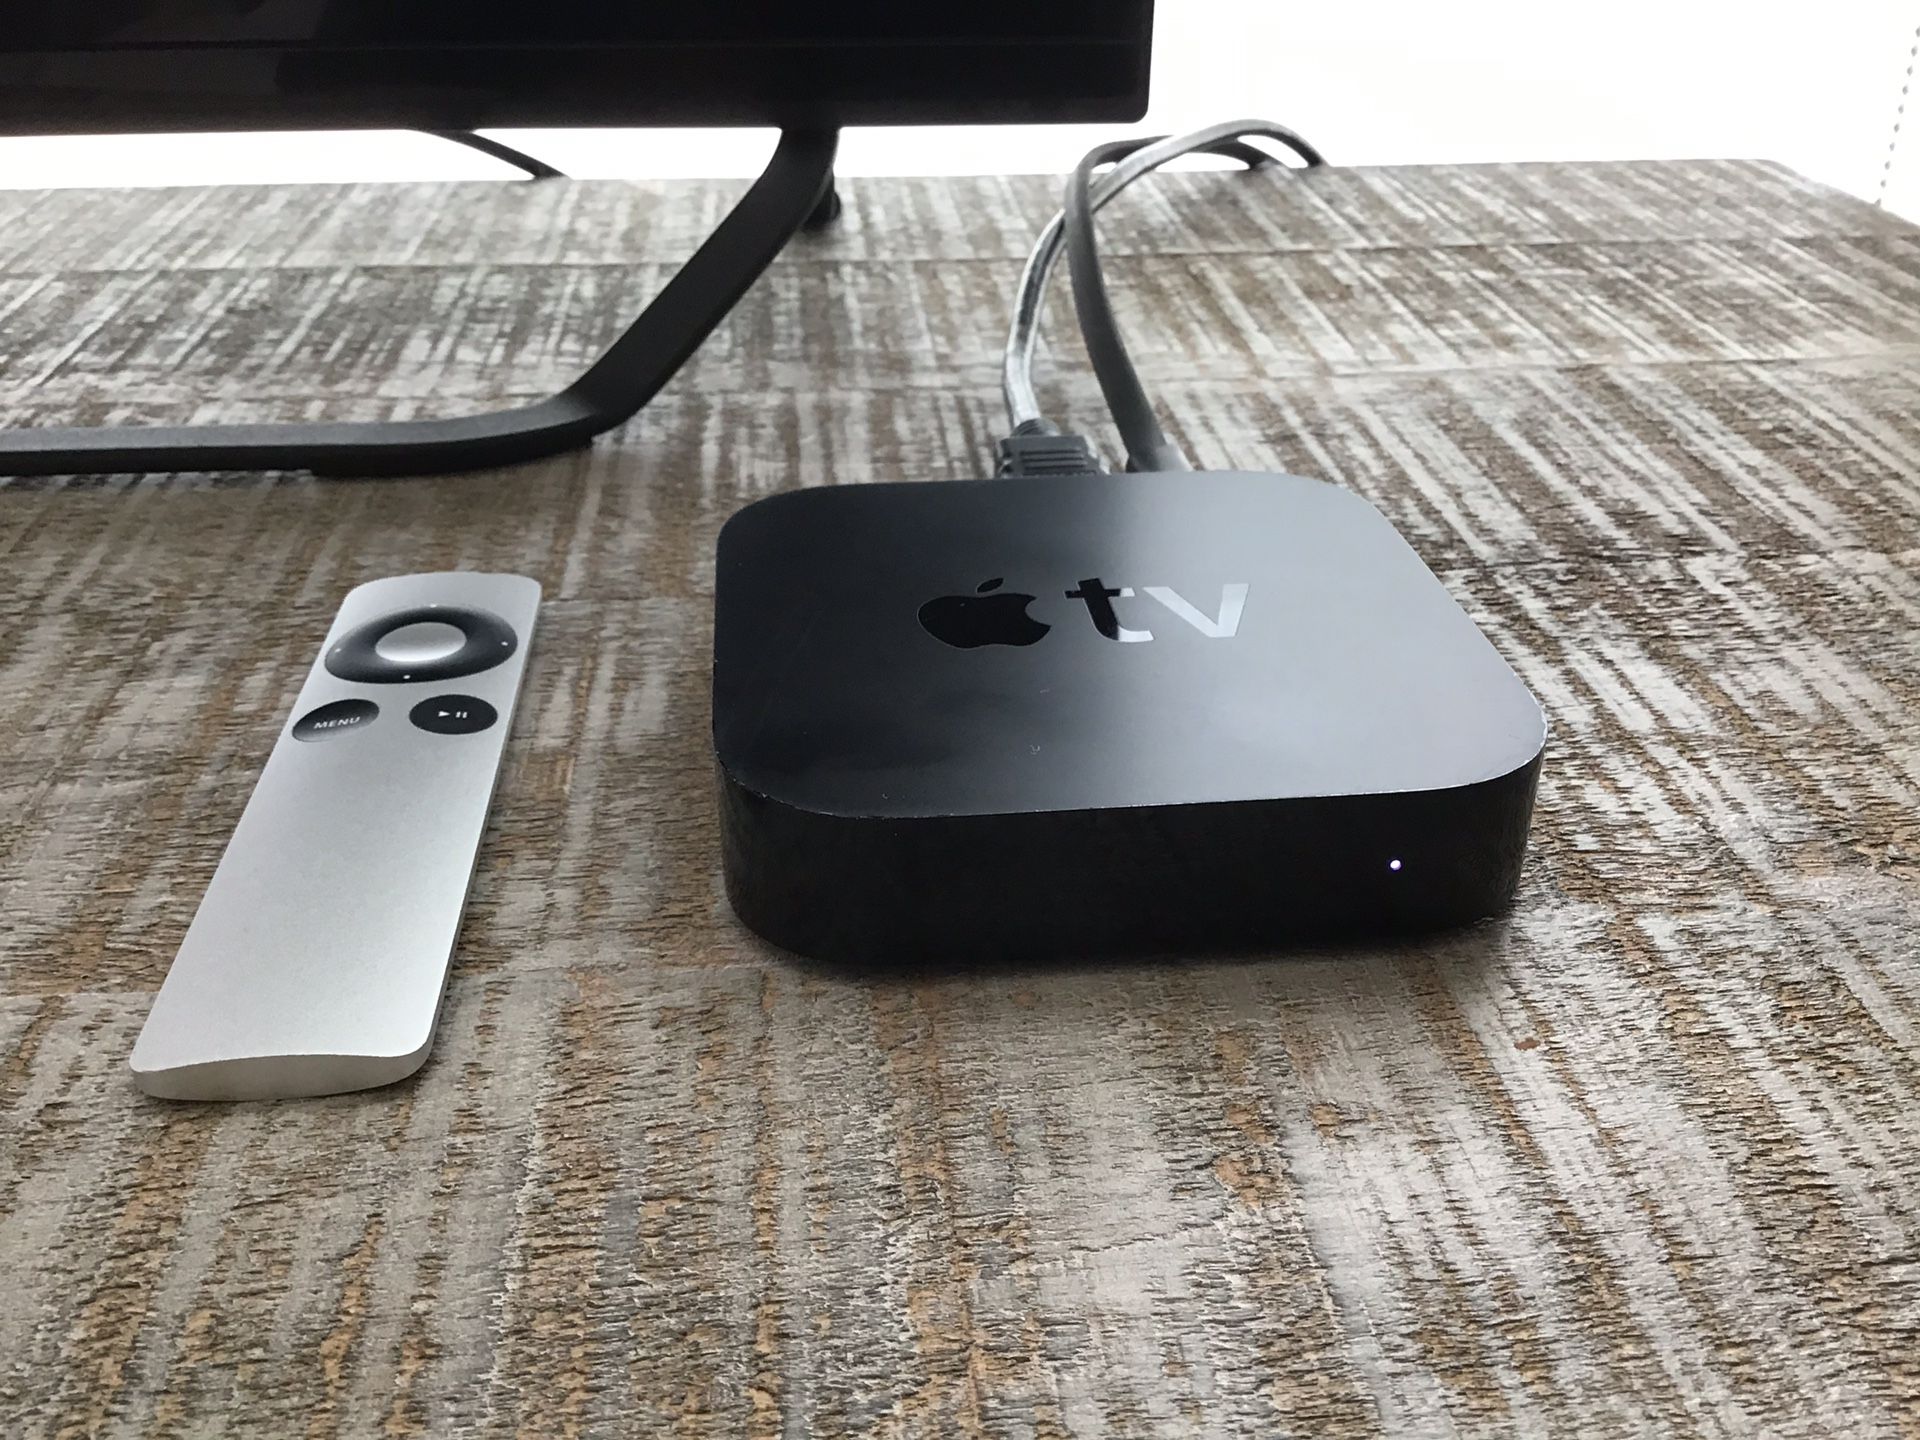 *** AVAILABLE NOW *** Apple TV 3rd Generation Device with Apple TV Remote and Set Up Guide (TV Not Included)!